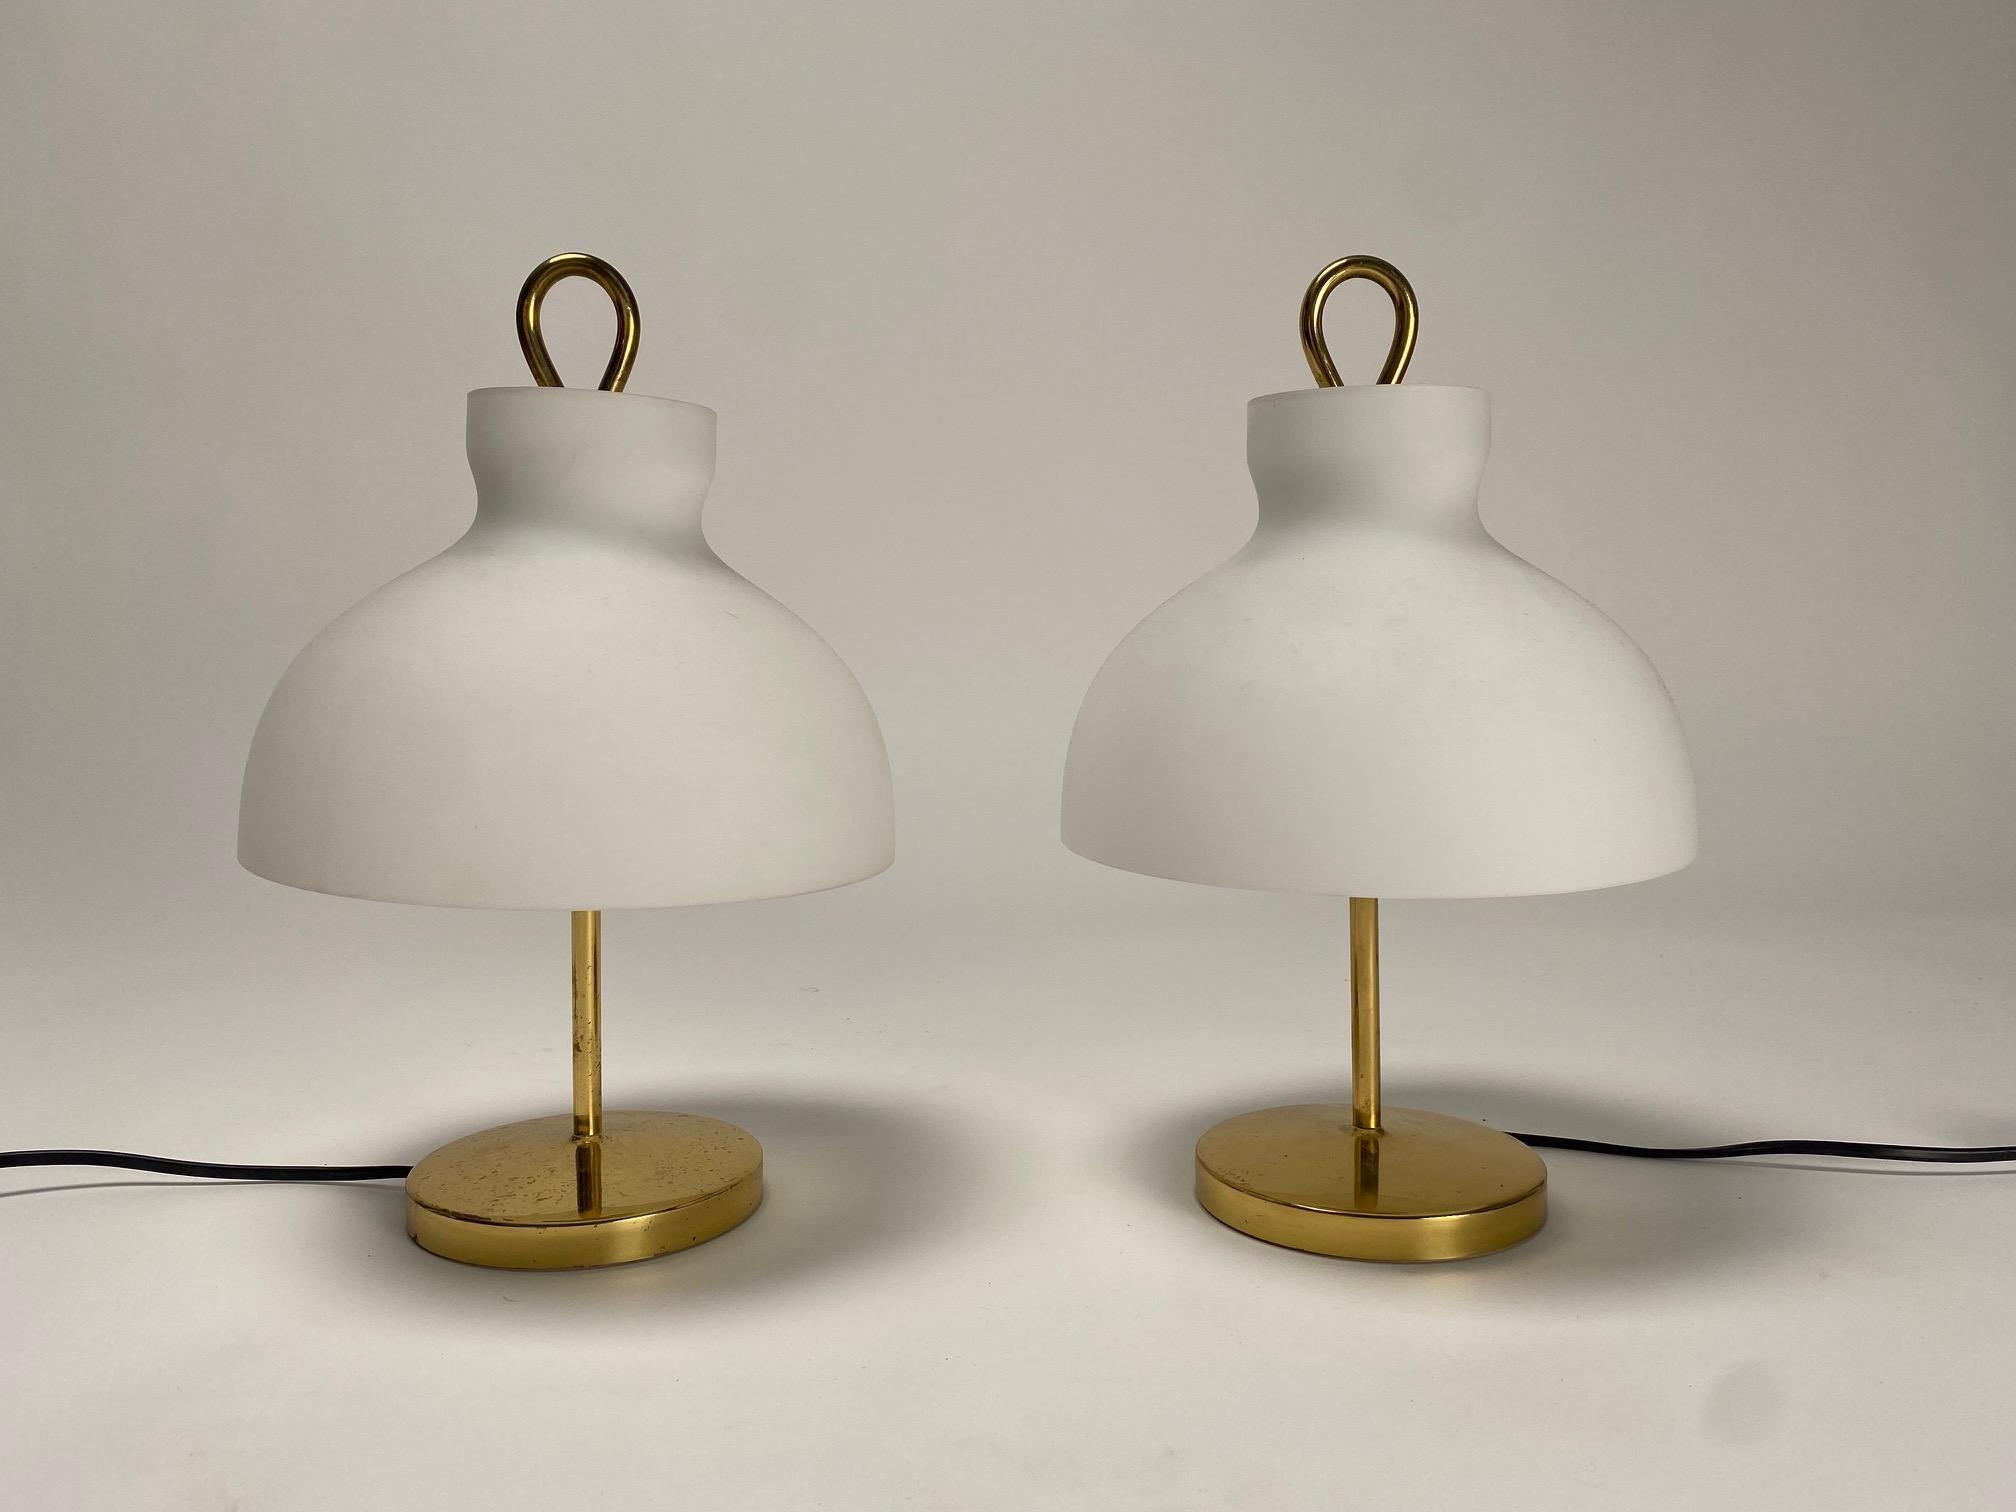 Mid-20th Century Arenzano Table Lamps by Ignazio Gardella for Azucena, Italy 1956 (First Edition)